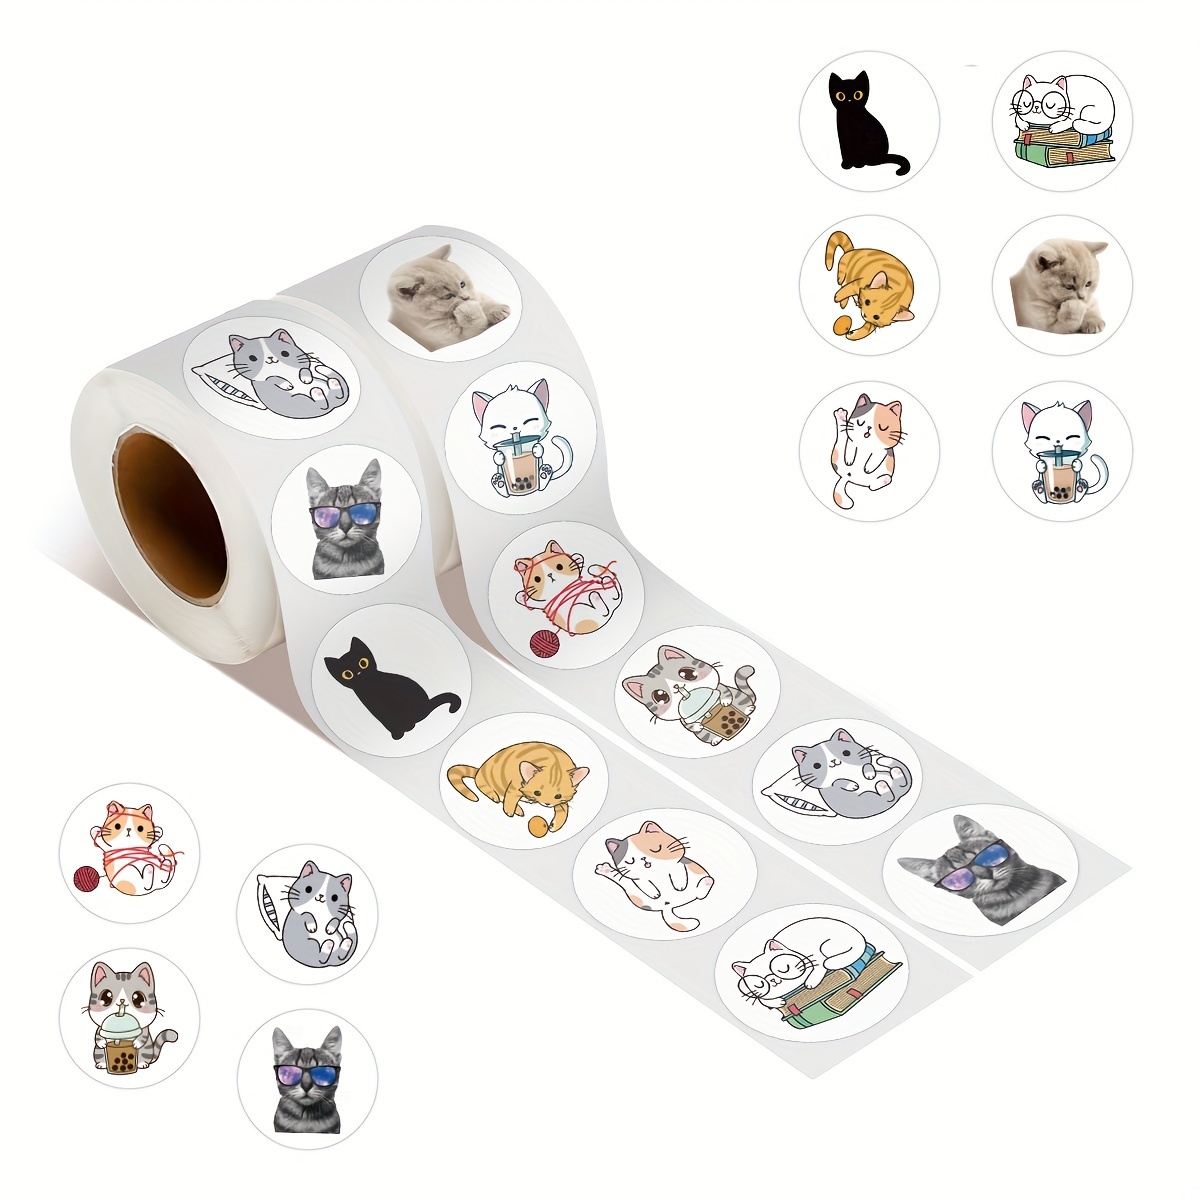 Cute Cats sticker mix for journaling or scrapbooking